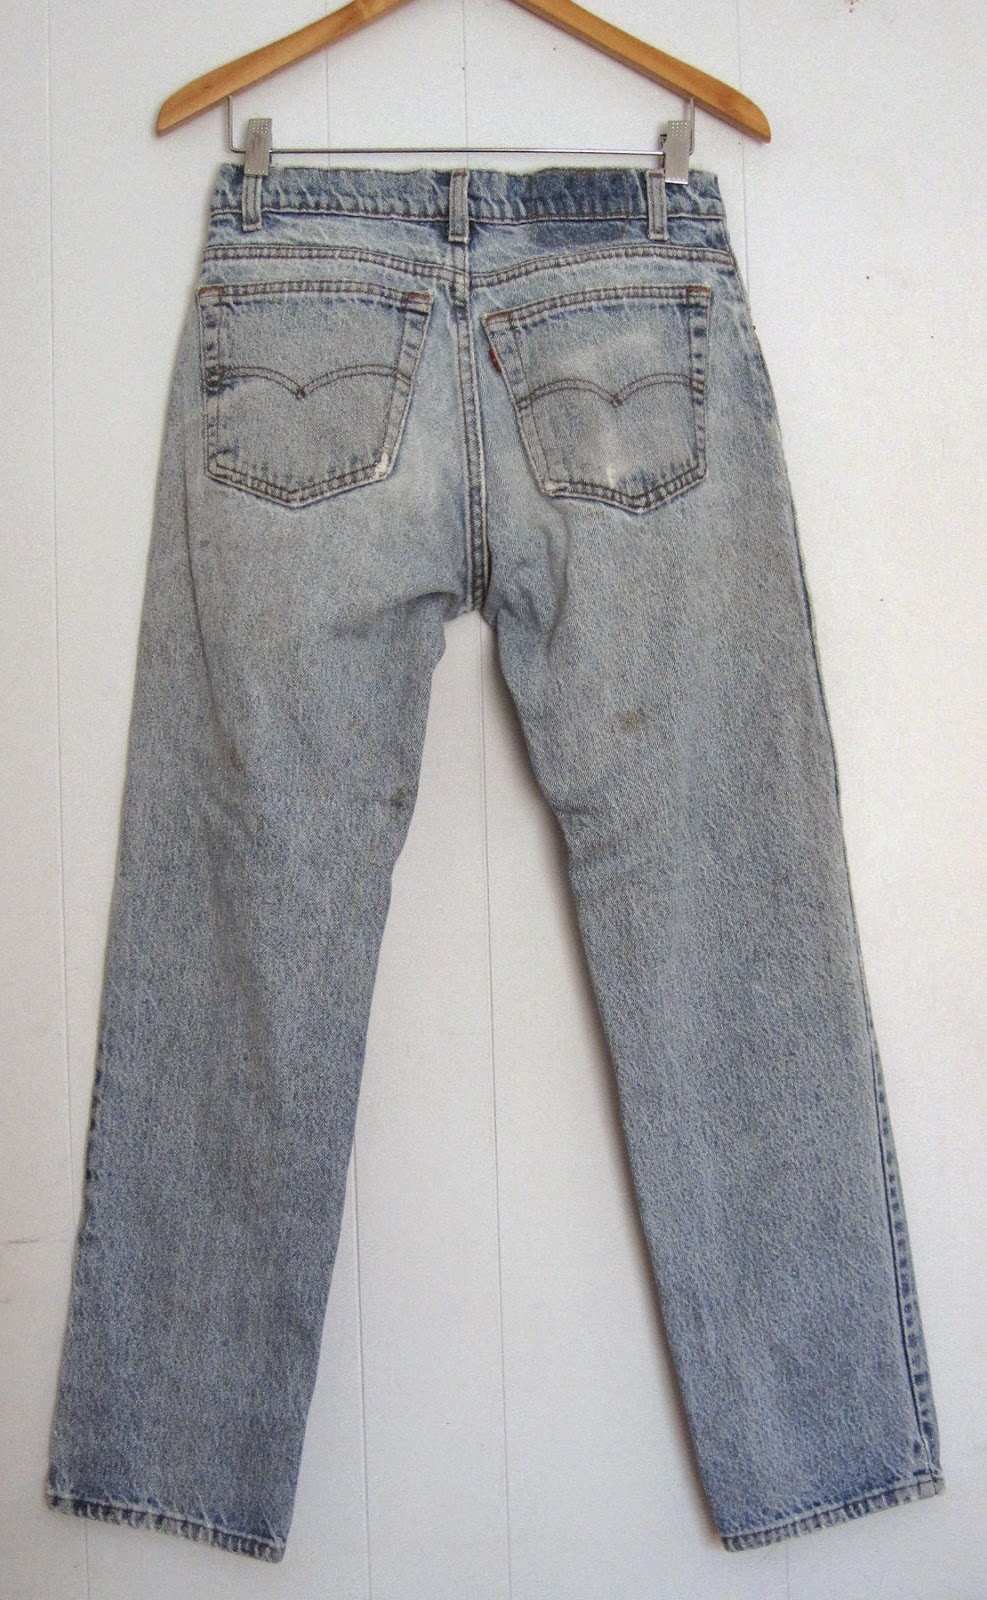 Vintage 90's Blogger Blue Jeans Stained and Faded